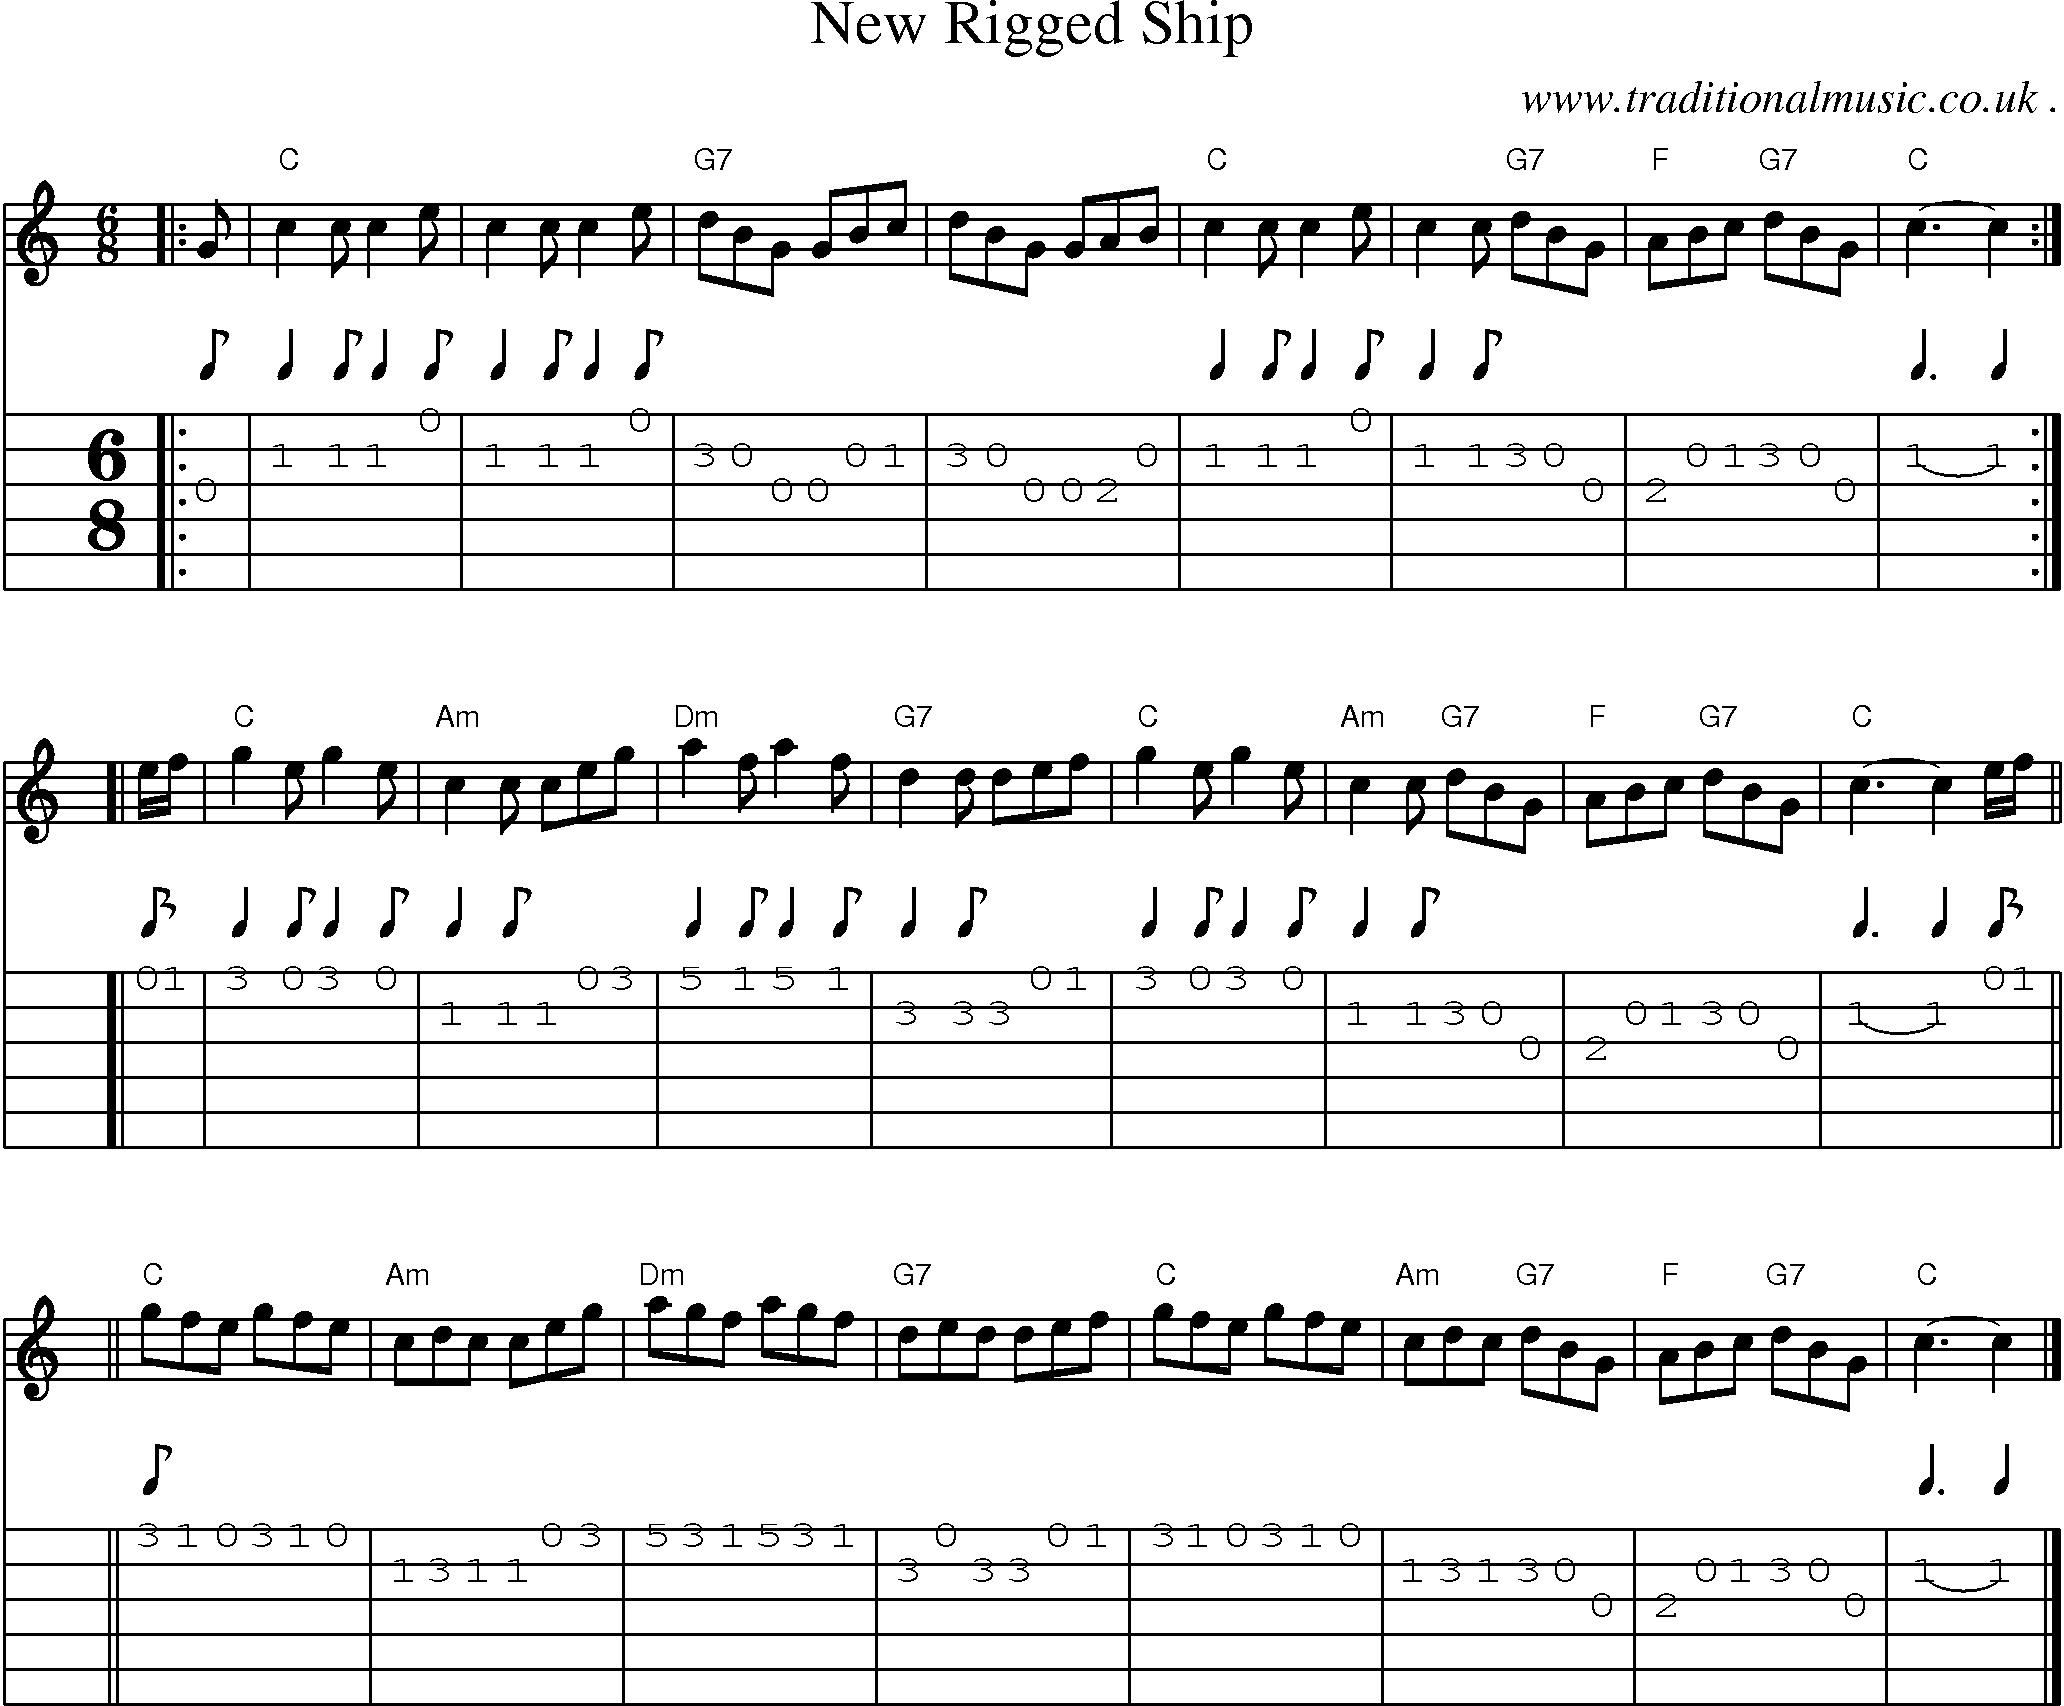 Sheet-music  score, Chords and Guitar Tabs for New Rigged Ship